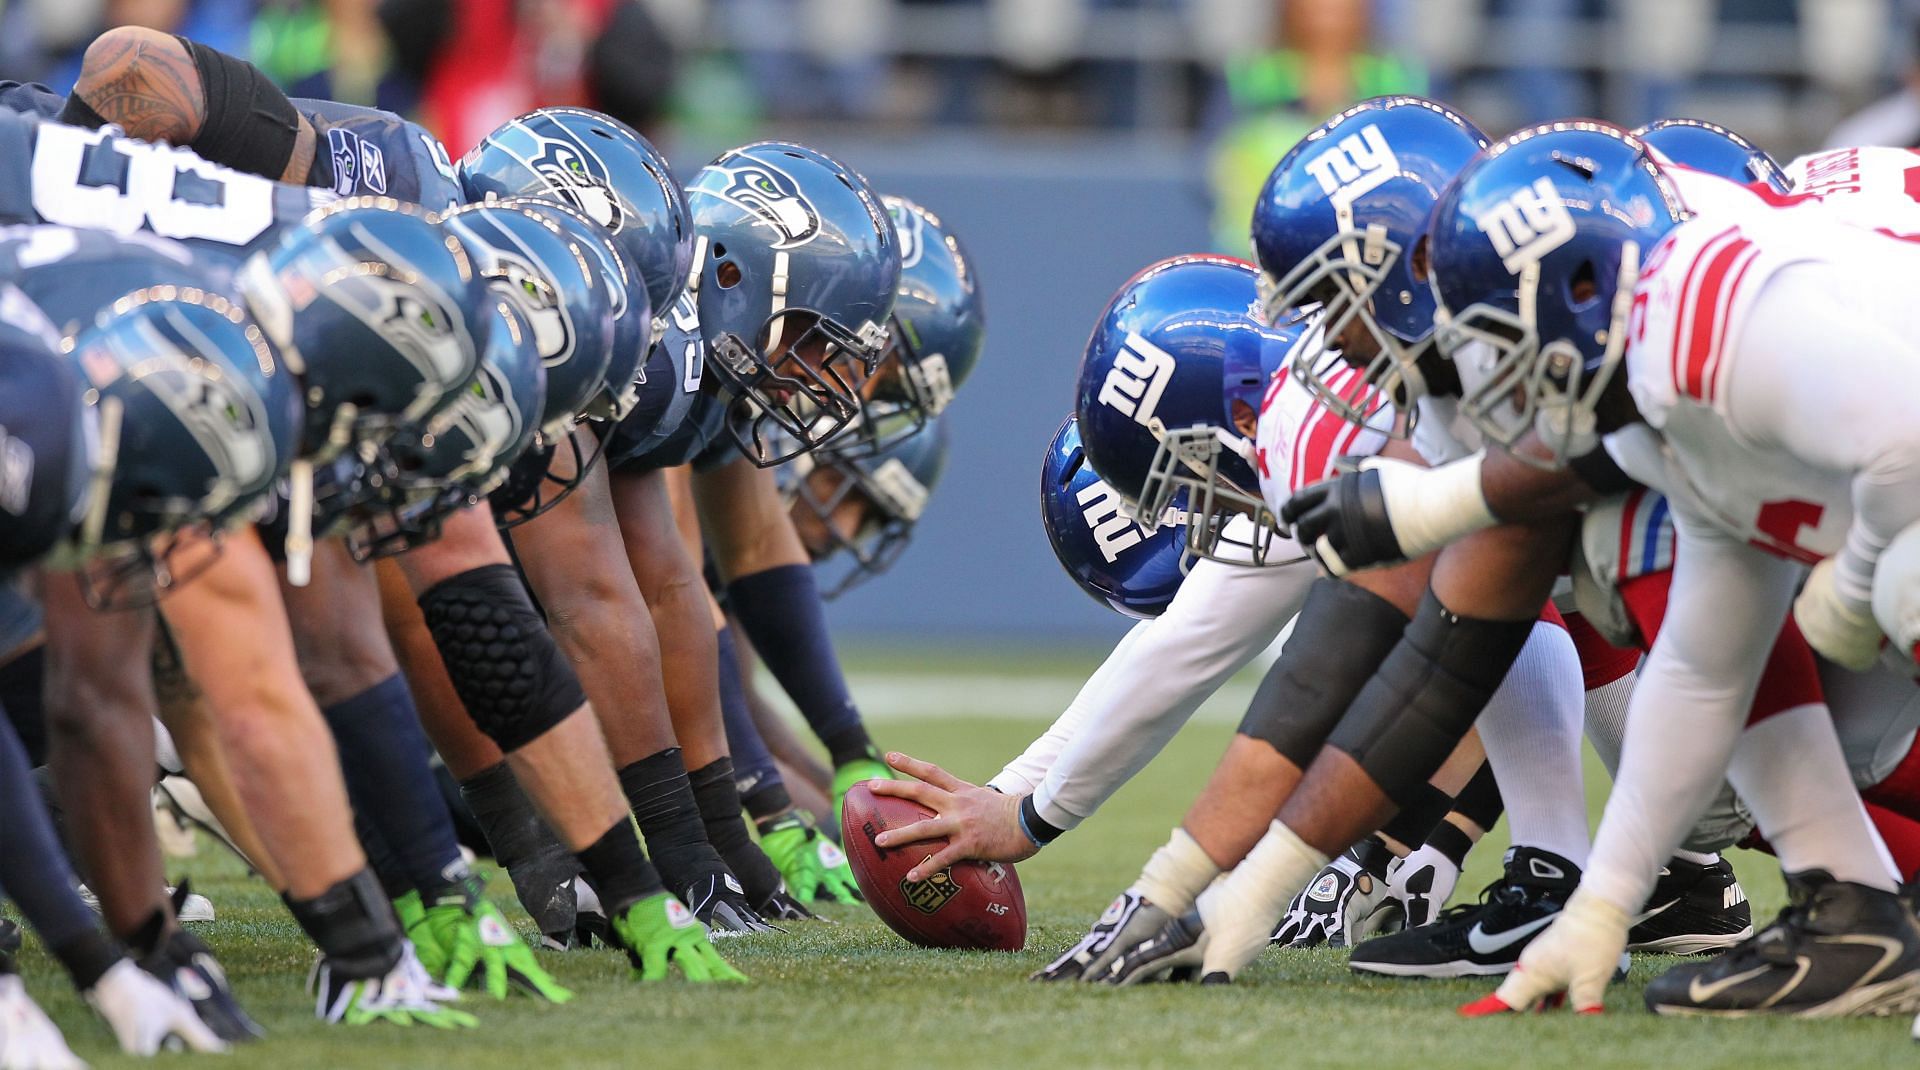 The Giants and Seahawks lineup during their 2010 get-together (Photo: Getty)